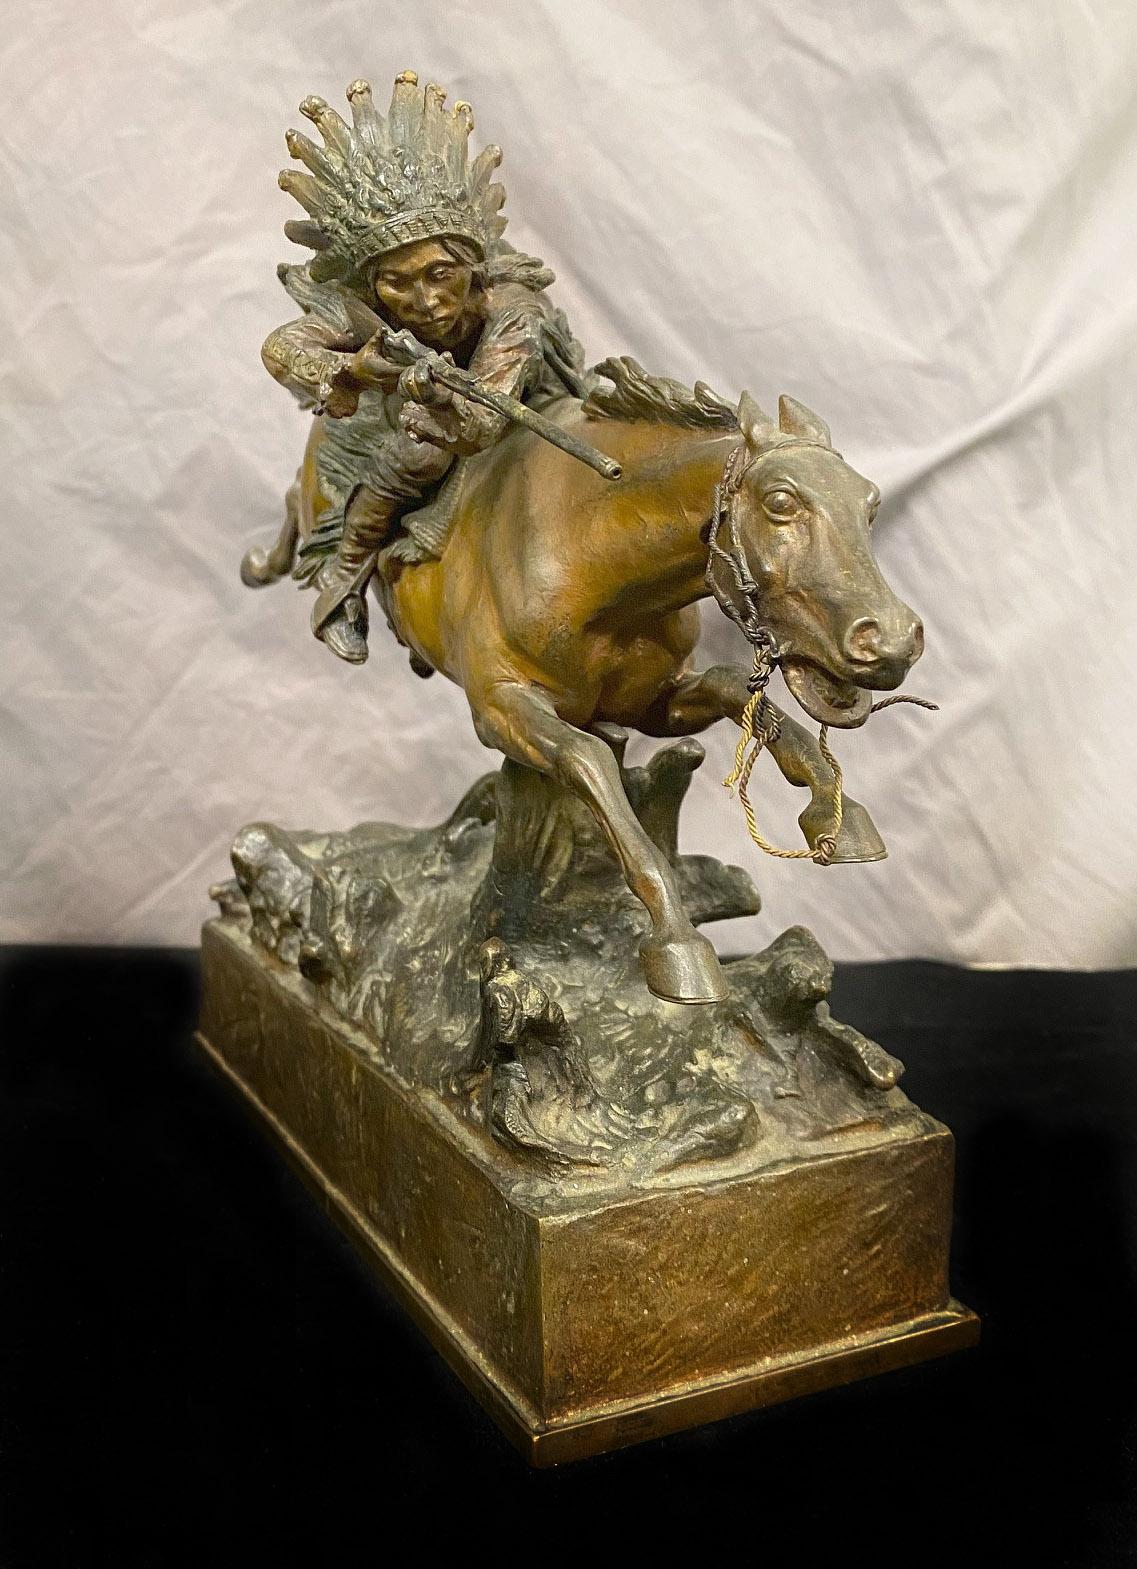 A very fine early 20th century Austrian bronze of an Indian Chief on Horseback by Carl Kauba.

Carl Kauba

The Native American in full war bonnet headdress and traditional clothing leaning over on his horse with his rifle ready to